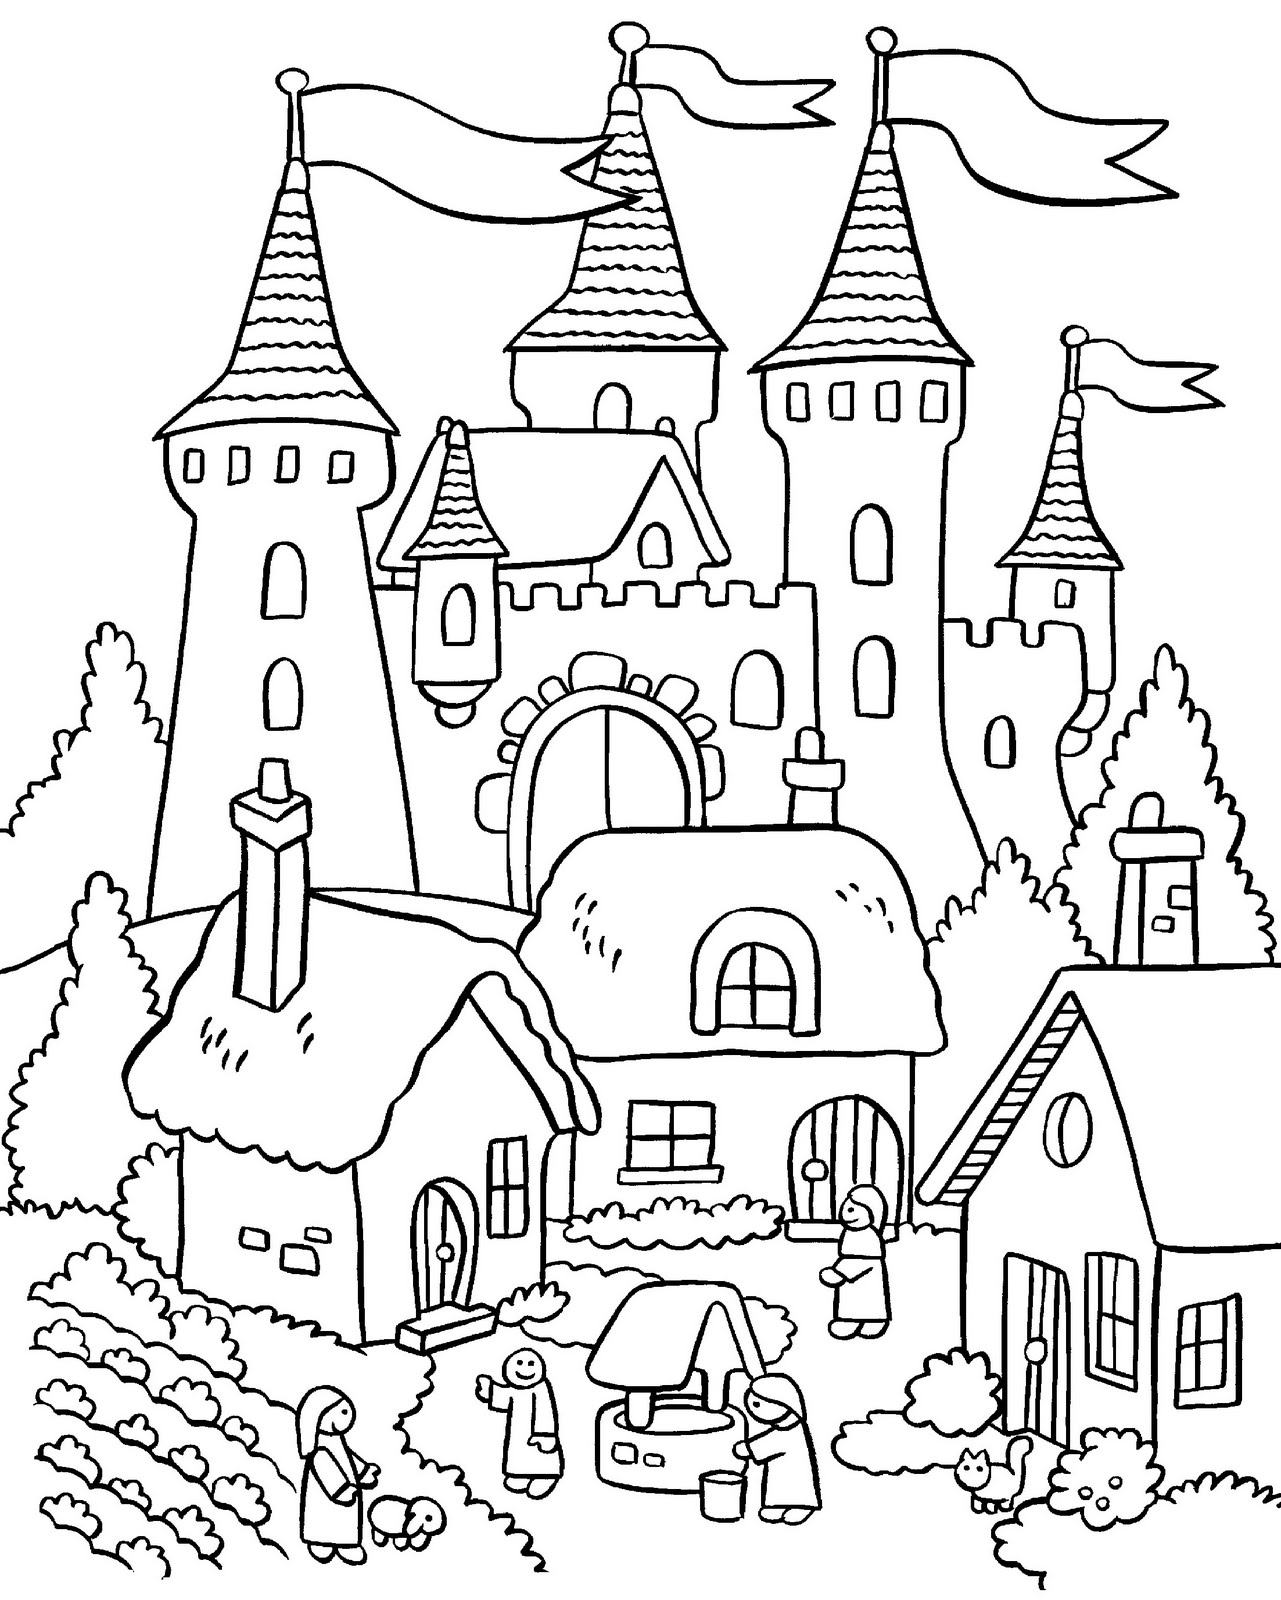 Garden coloring pages to download and print for free